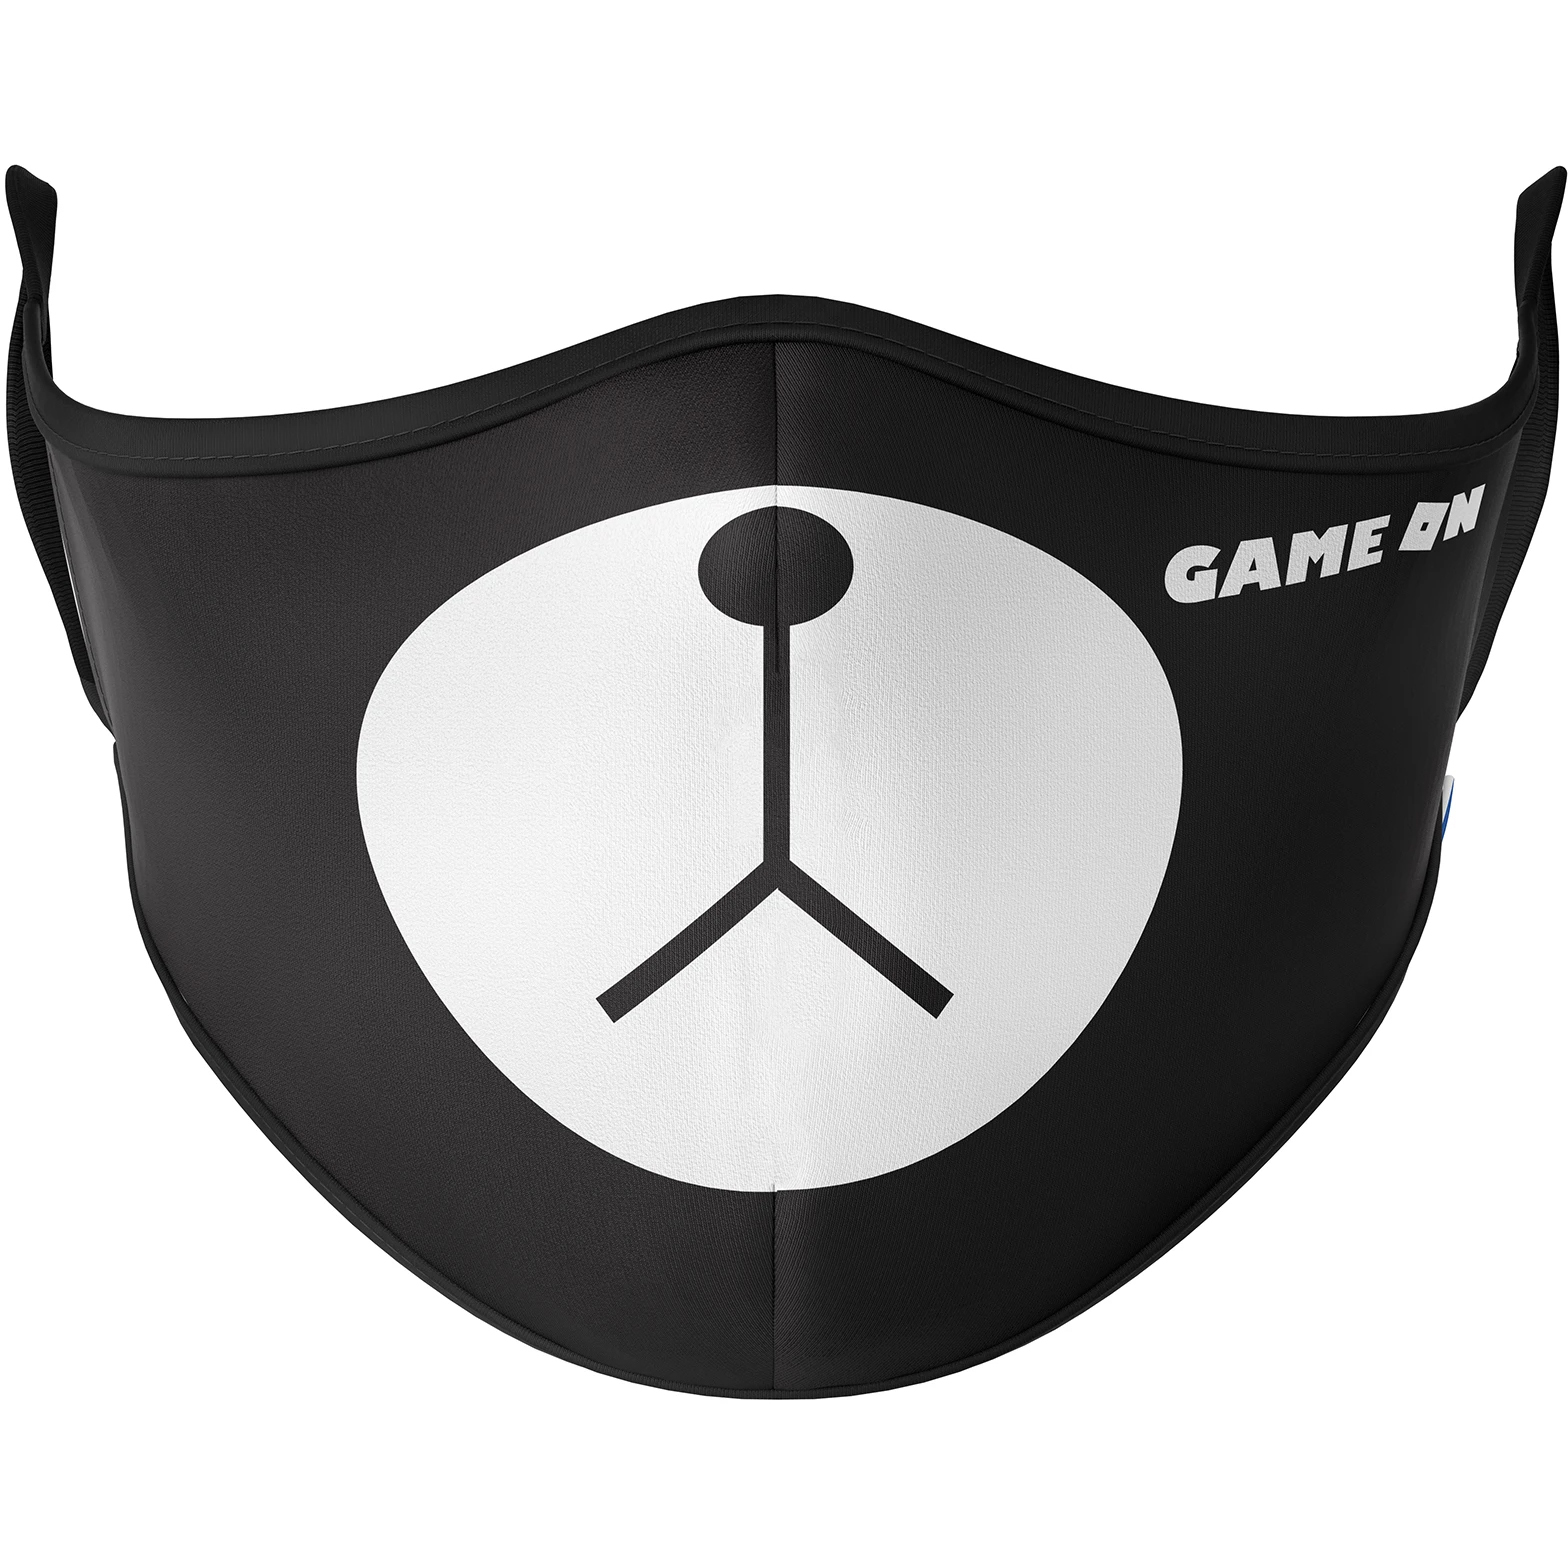 Game On Faces Reusable Face Masks